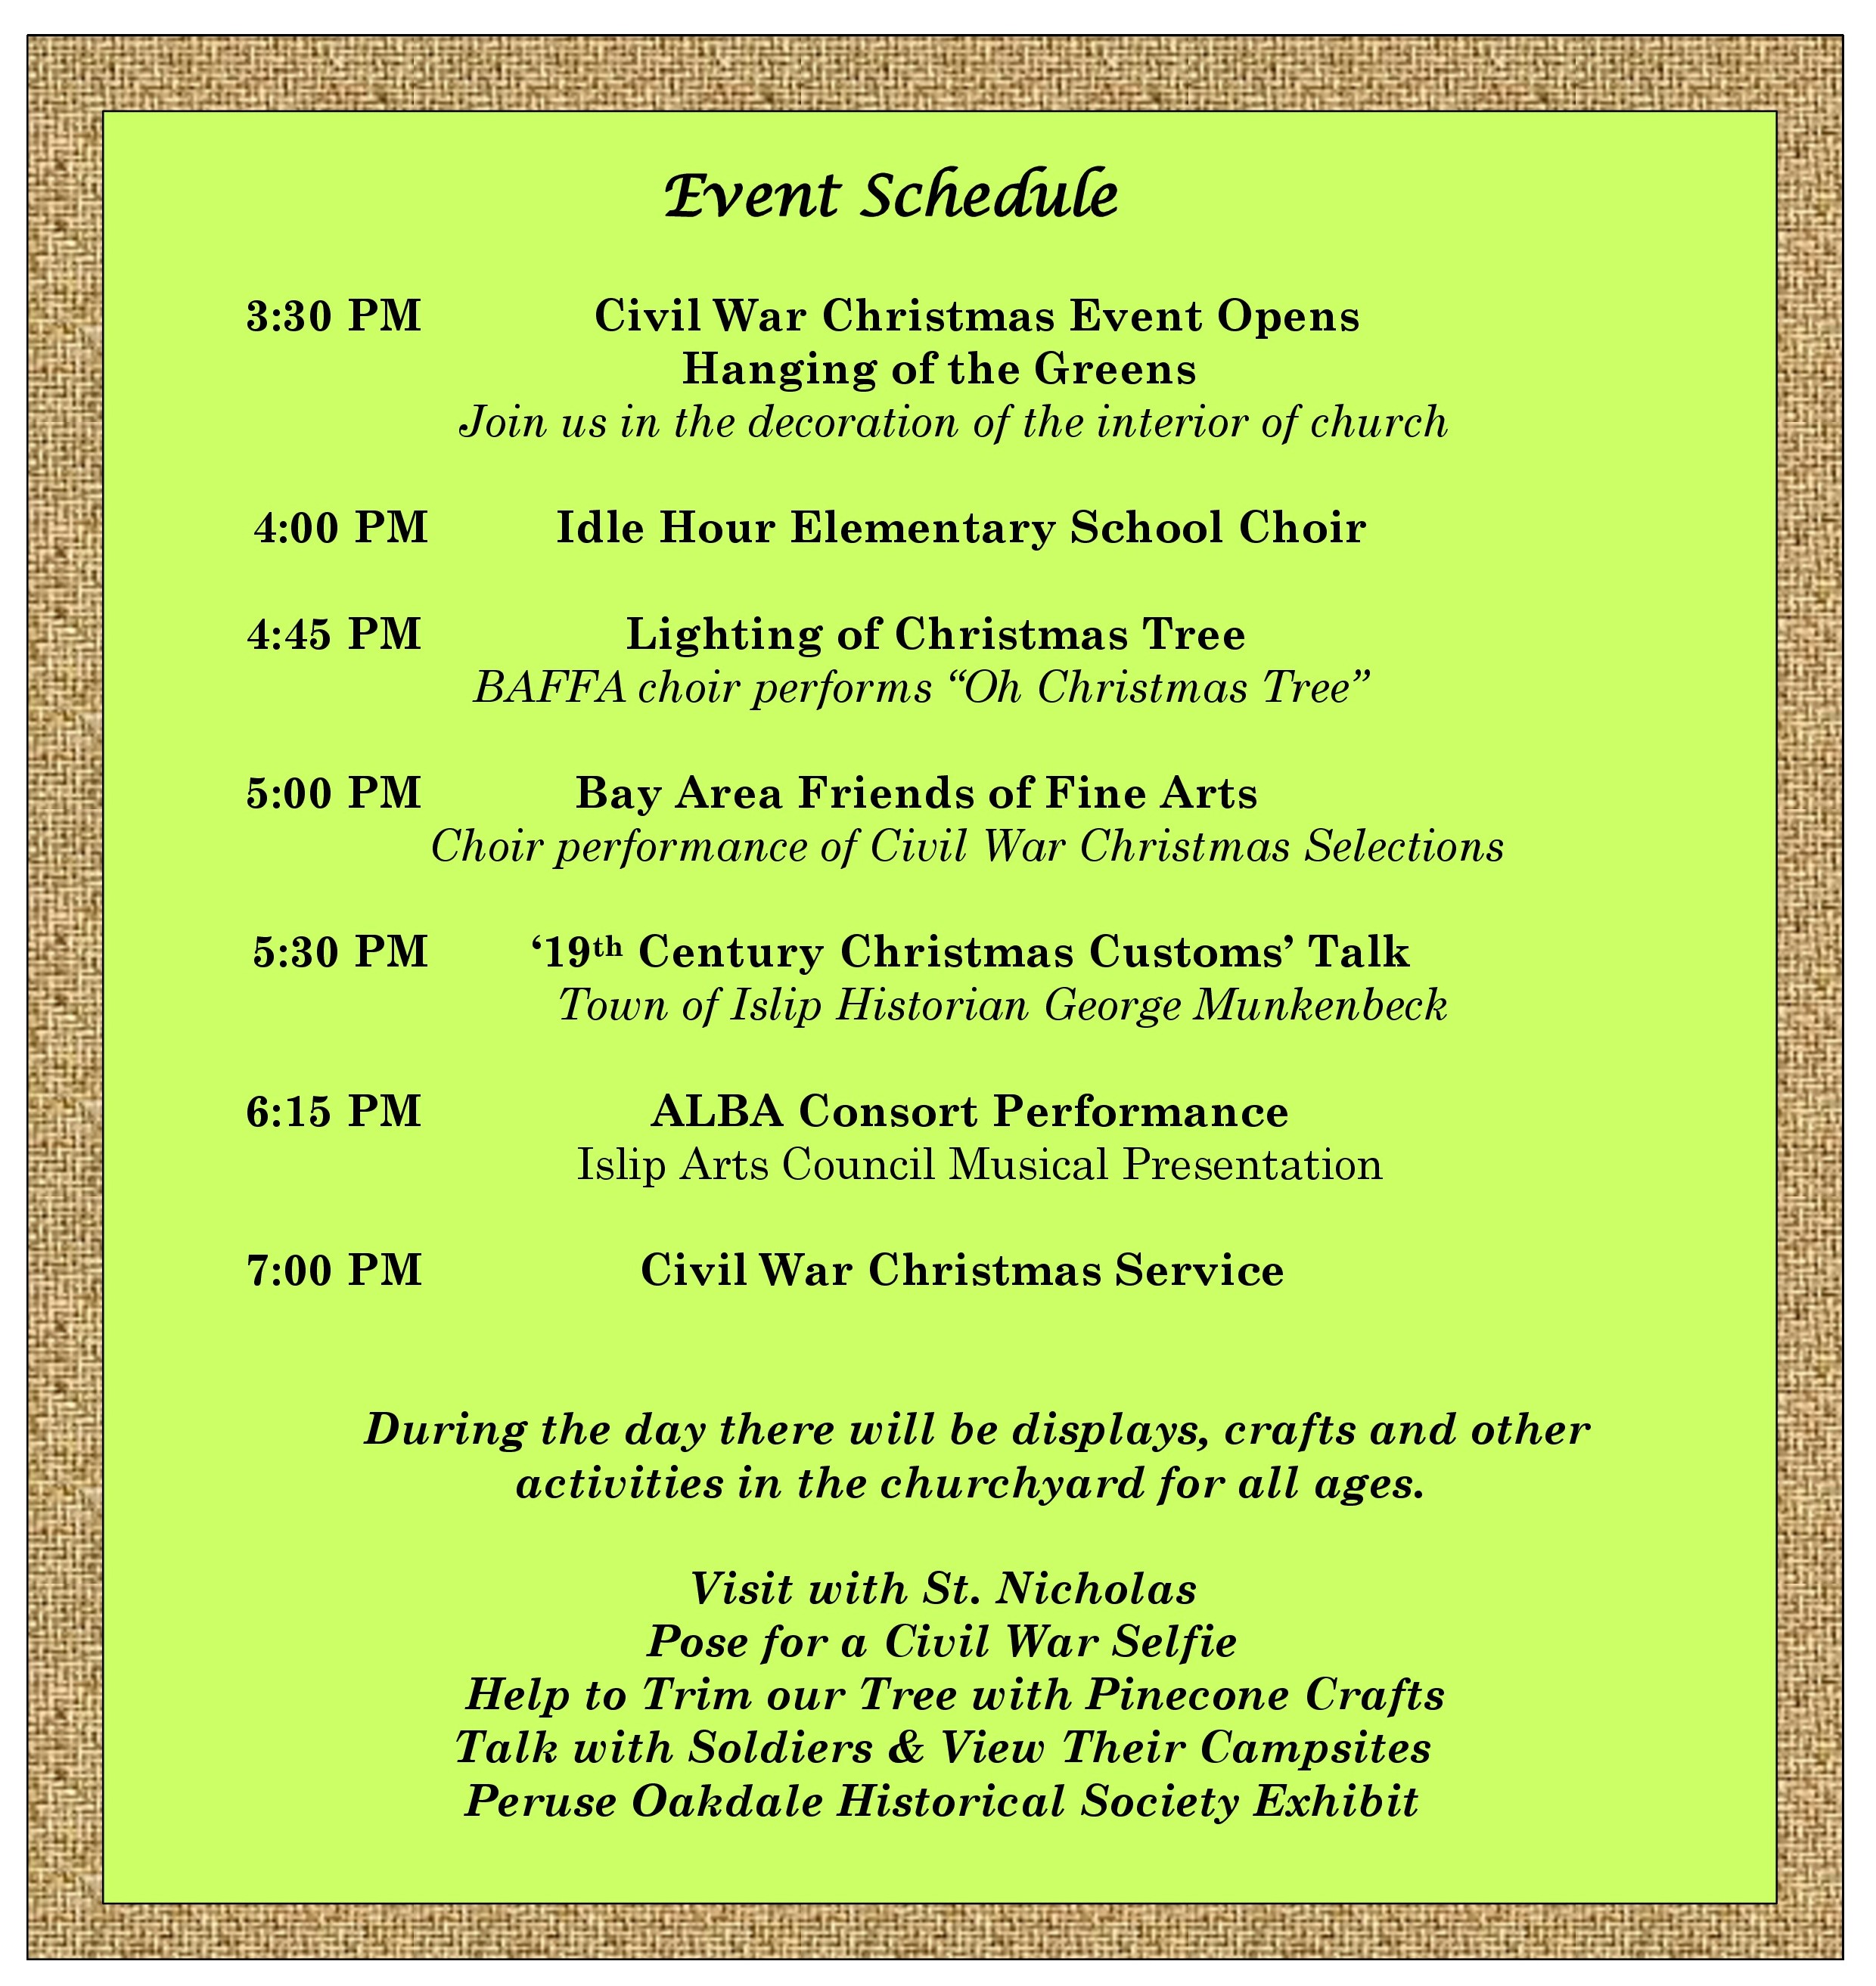 a rundown of the event schedule with the civil war events opening with a decoration of the church beginning at 3:30pm!